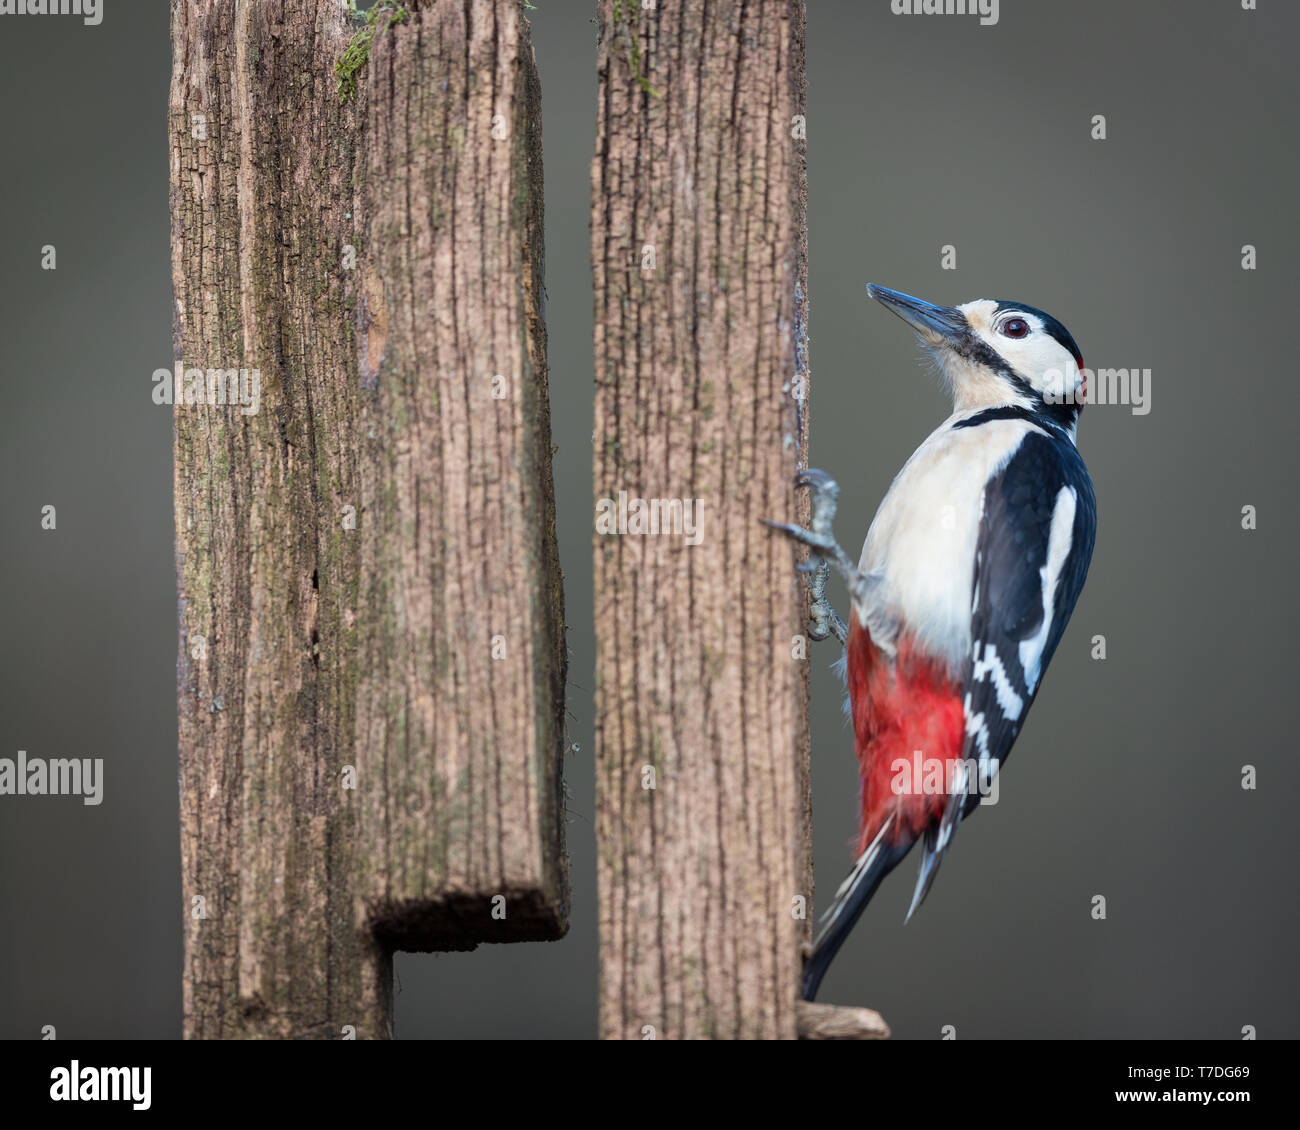 Great spotted woodpecker perched on an old fence post Stock Photo